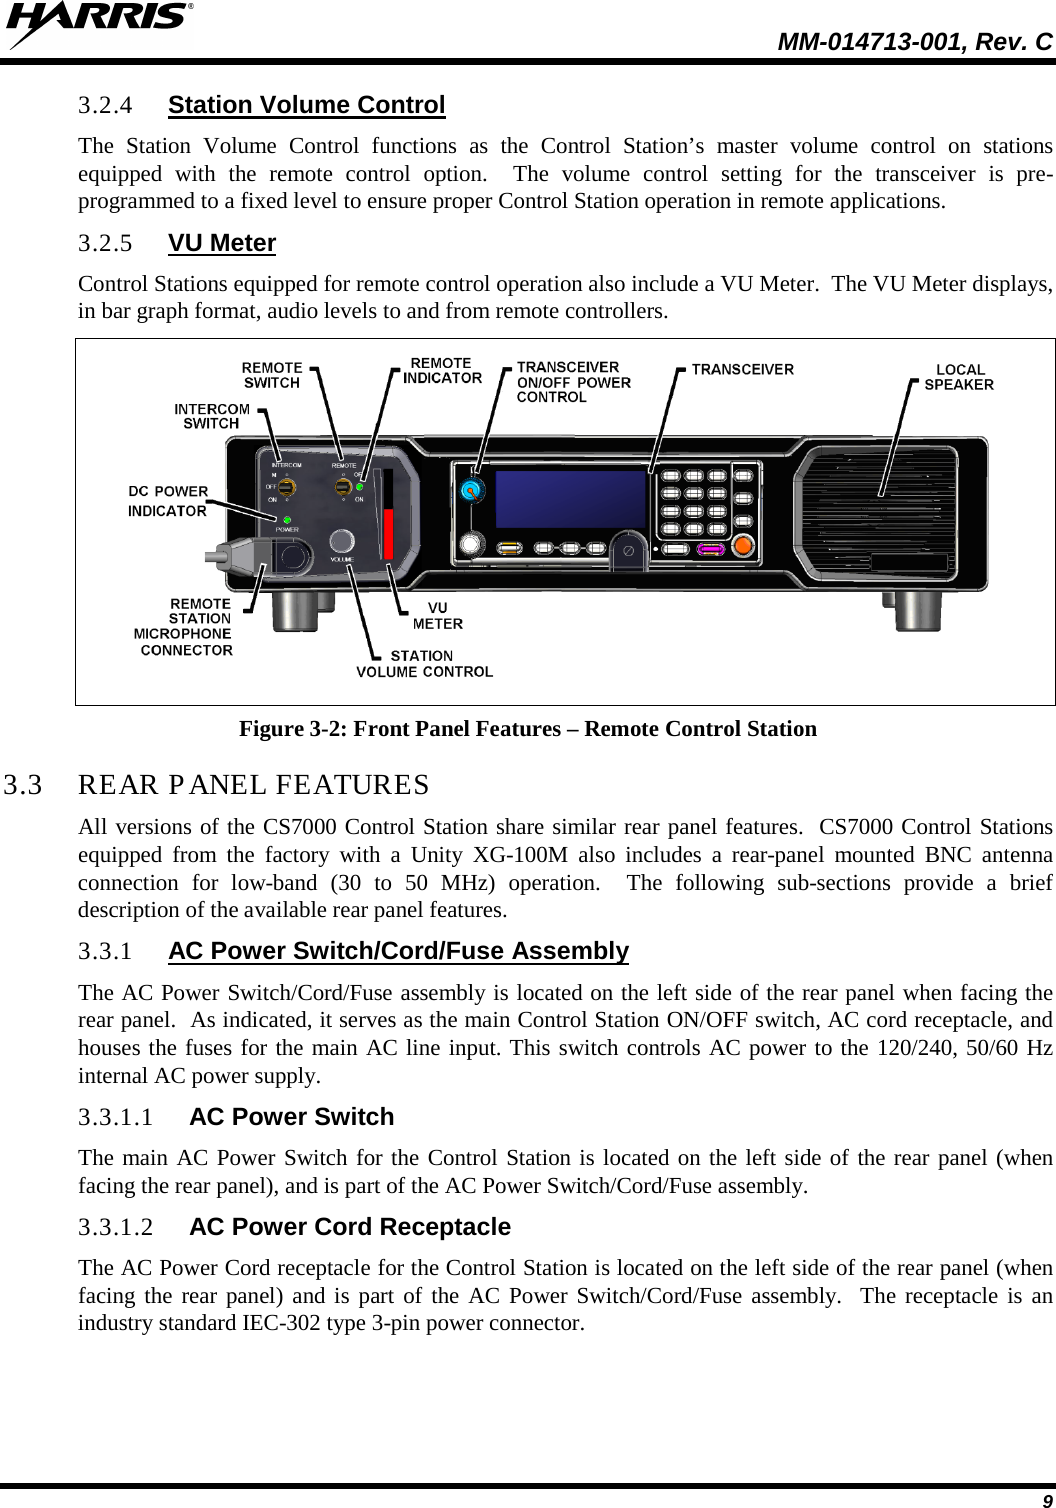  MM-014713-001, Rev. C   9 3.2.4 Station Volume Control The Station Volume Control functions as the Control Station’s master volume control on stations equipped with the remote control option.  The volume control setting for the transceiver is pre-programmed to a fixed level to ensure proper Control Station operation in remote applications. 3.2.5 VU Meter Control Stations equipped for remote control operation also include a VU Meter.  The VU Meter displays, in bar graph format, audio levels to and from remote controllers.  Figure 3-2: Front Panel Features – Remote Control Station 3.3 REAR PANEL FEATURES All versions of the CS7000 Control Station share similar rear panel features.  CS7000 Control Stations equipped from the factory with a Unity XG-100M also includes a rear-panel mounted BNC antenna connection for low-band (30 to 50 MHz) operation.  The following sub-sections provide a brief description of the available rear panel features. 3.3.1 AC Power Switch/Cord/Fuse Assembly The AC Power Switch/Cord/Fuse assembly is located on the left side of the rear panel when facing the rear panel.  As indicated, it serves as the main Control Station ON/OFF switch, AC cord receptacle, and houses the fuses for the main AC line input. This switch controls AC power to the 120/240, 50/60 Hz internal AC power supply. 3.3.1.1 AC Power Switch The main AC Power Switch for the Control Station is located on the left side of the rear panel (when facing the rear panel), and is part of the AC Power Switch/Cord/Fuse assembly. 3.3.1.2 AC Power Cord Receptacle The AC Power Cord receptacle for the Control Station is located on the left side of the rear panel (when facing the rear panel) and is part of the AC Power Switch/Cord/Fuse assembly.  The receptacle is an industry standard IEC-302 type 3-pin power connector. 